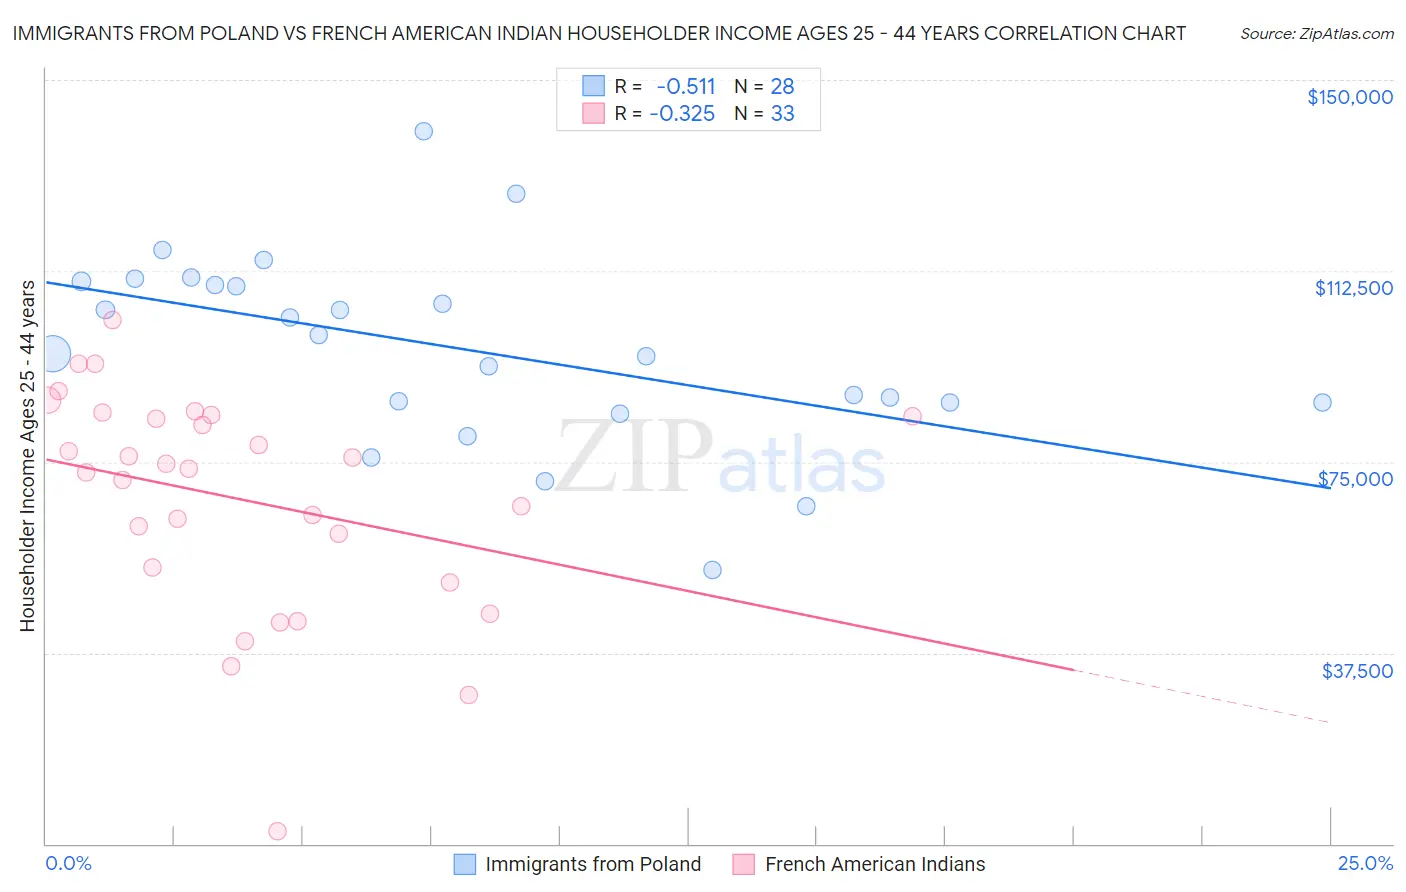 Immigrants from Poland vs French American Indian Householder Income Ages 25 - 44 years